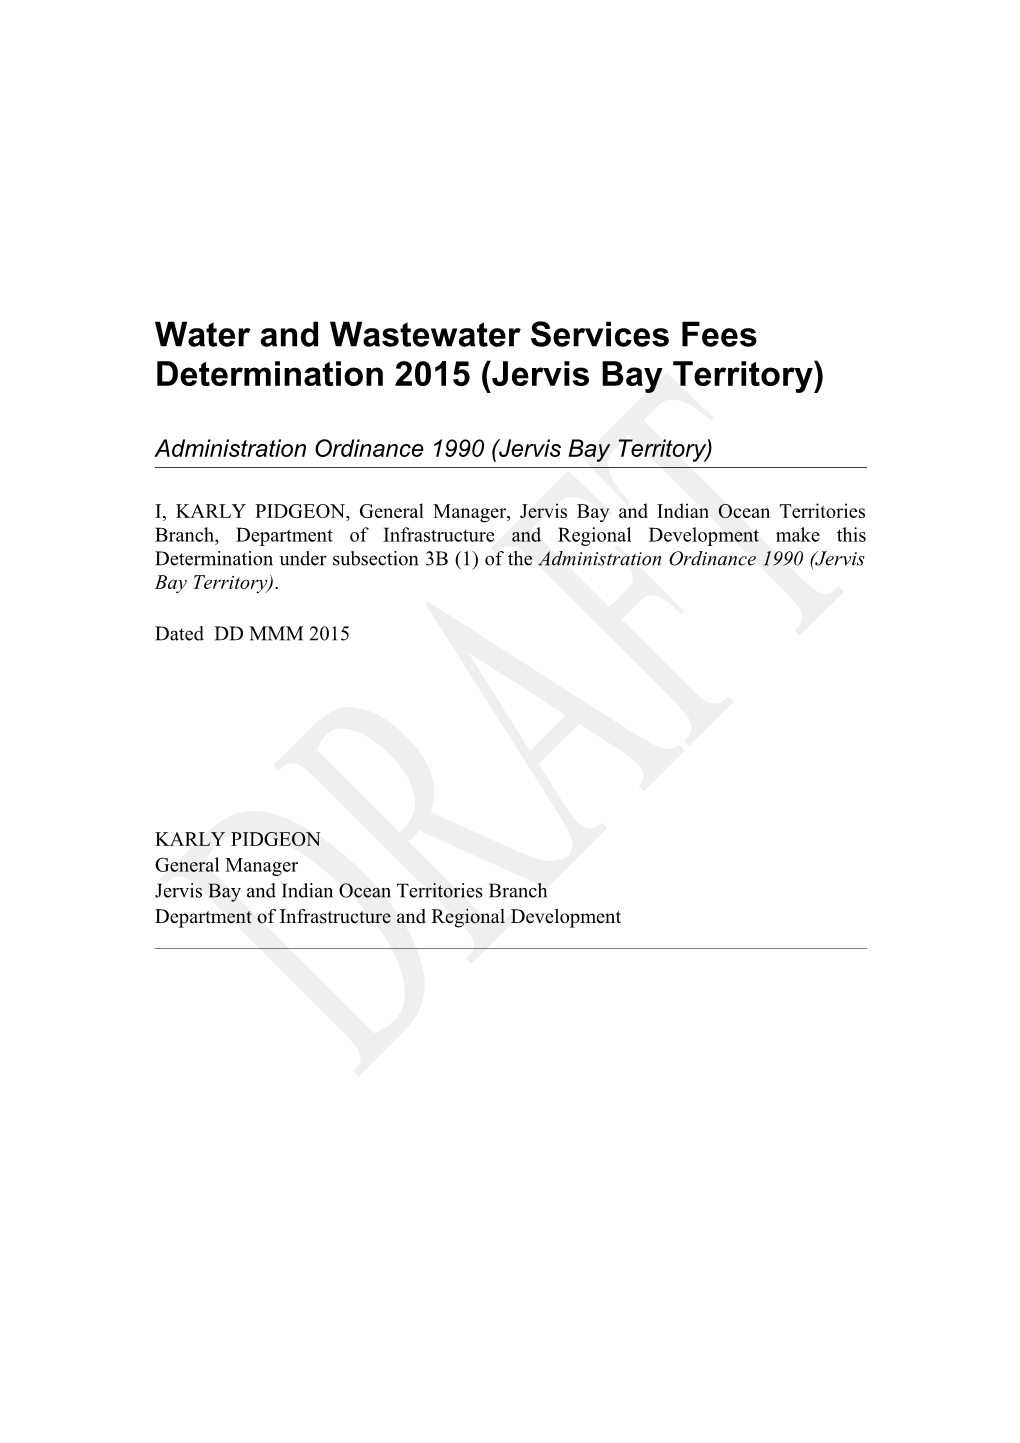 Water and Sewerage Services Fees Determination 2011